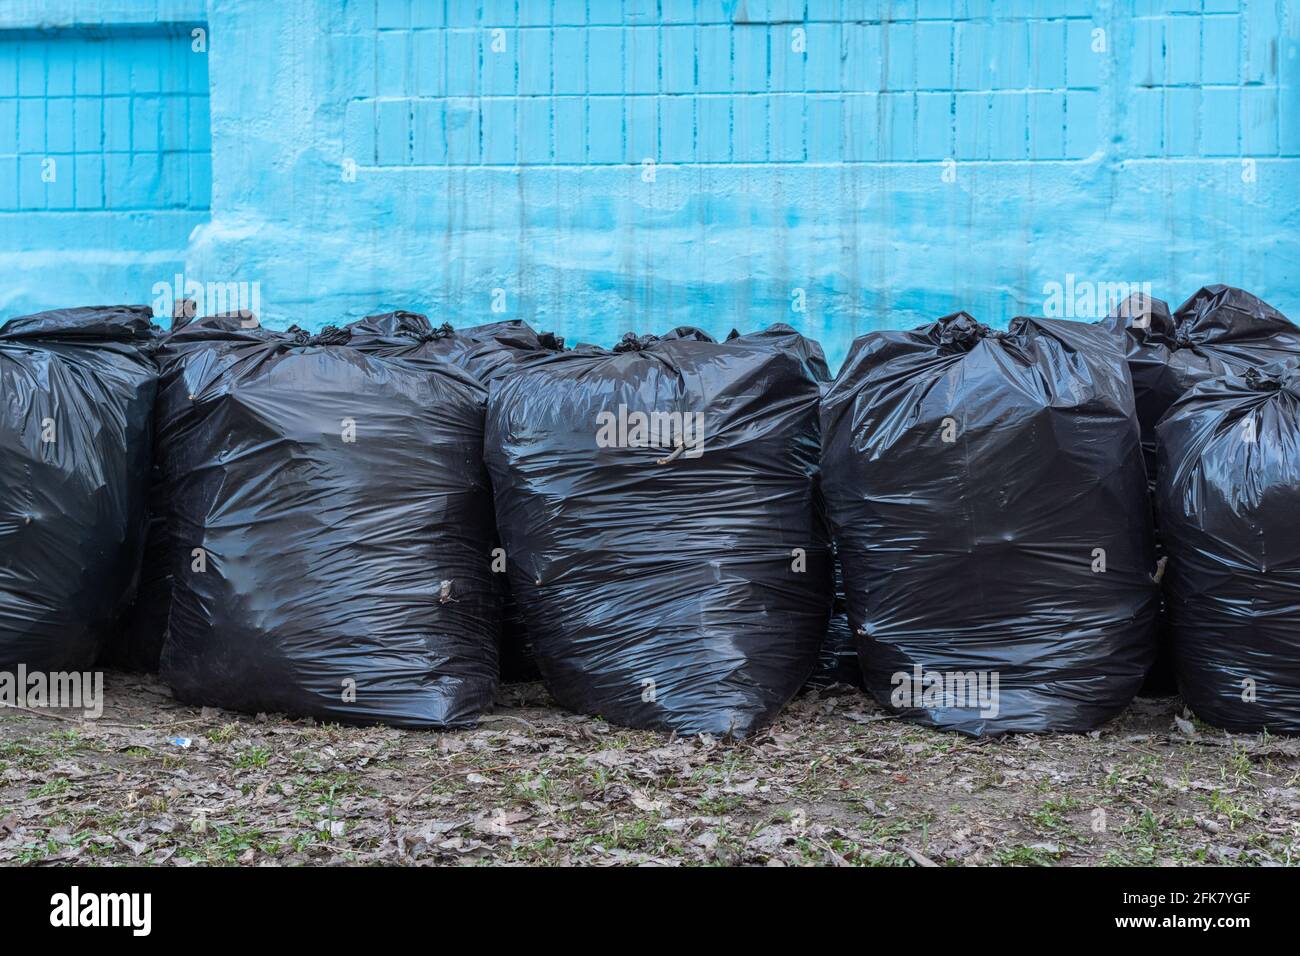 https://c8.alamy.com/comp/2FK7YGF/row-of-black-plastic-garbage-bags-on-a-blue-background-of-the-house-bags-of-garbage-seasonal-cleaning-of-city-streets-cleaning-service-2FK7YGF.jpg